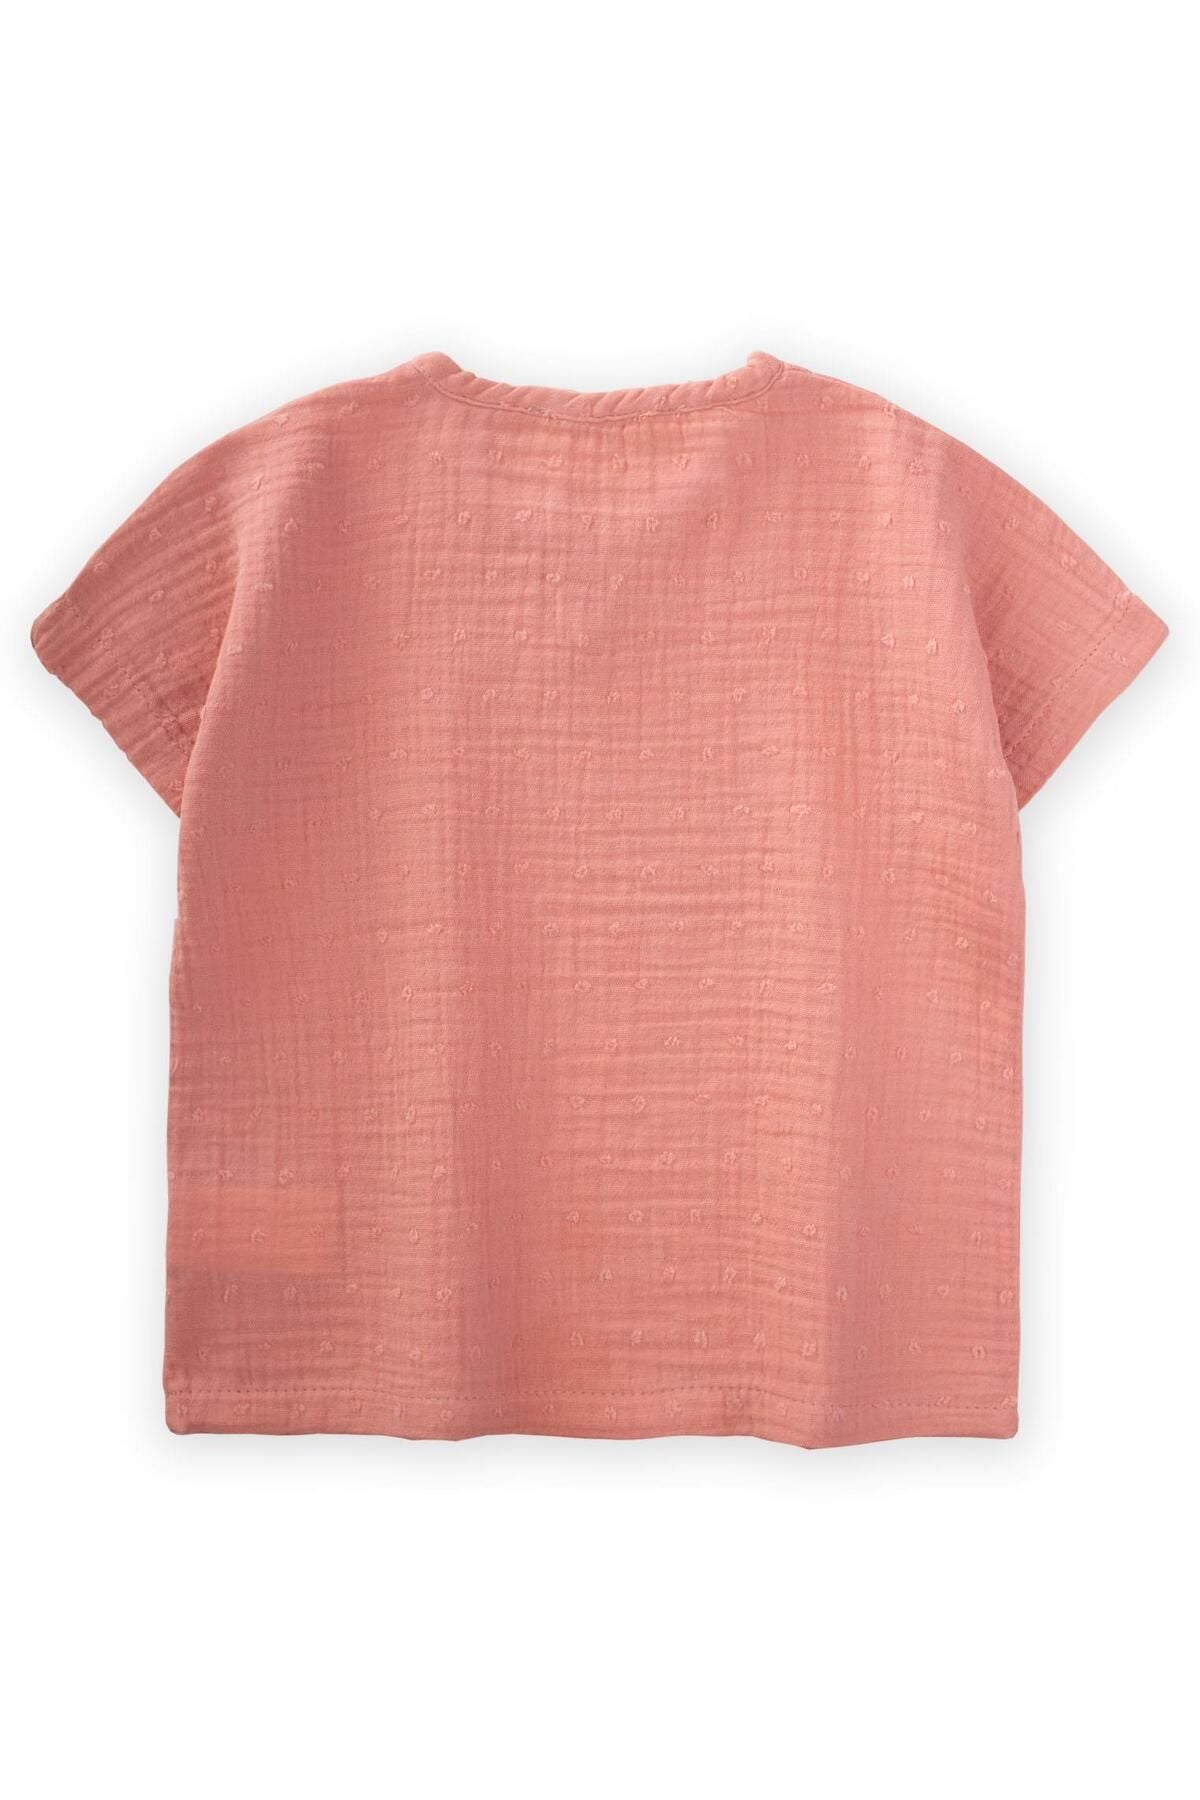 Textured organic muslin t-shift 2-8 years old baby